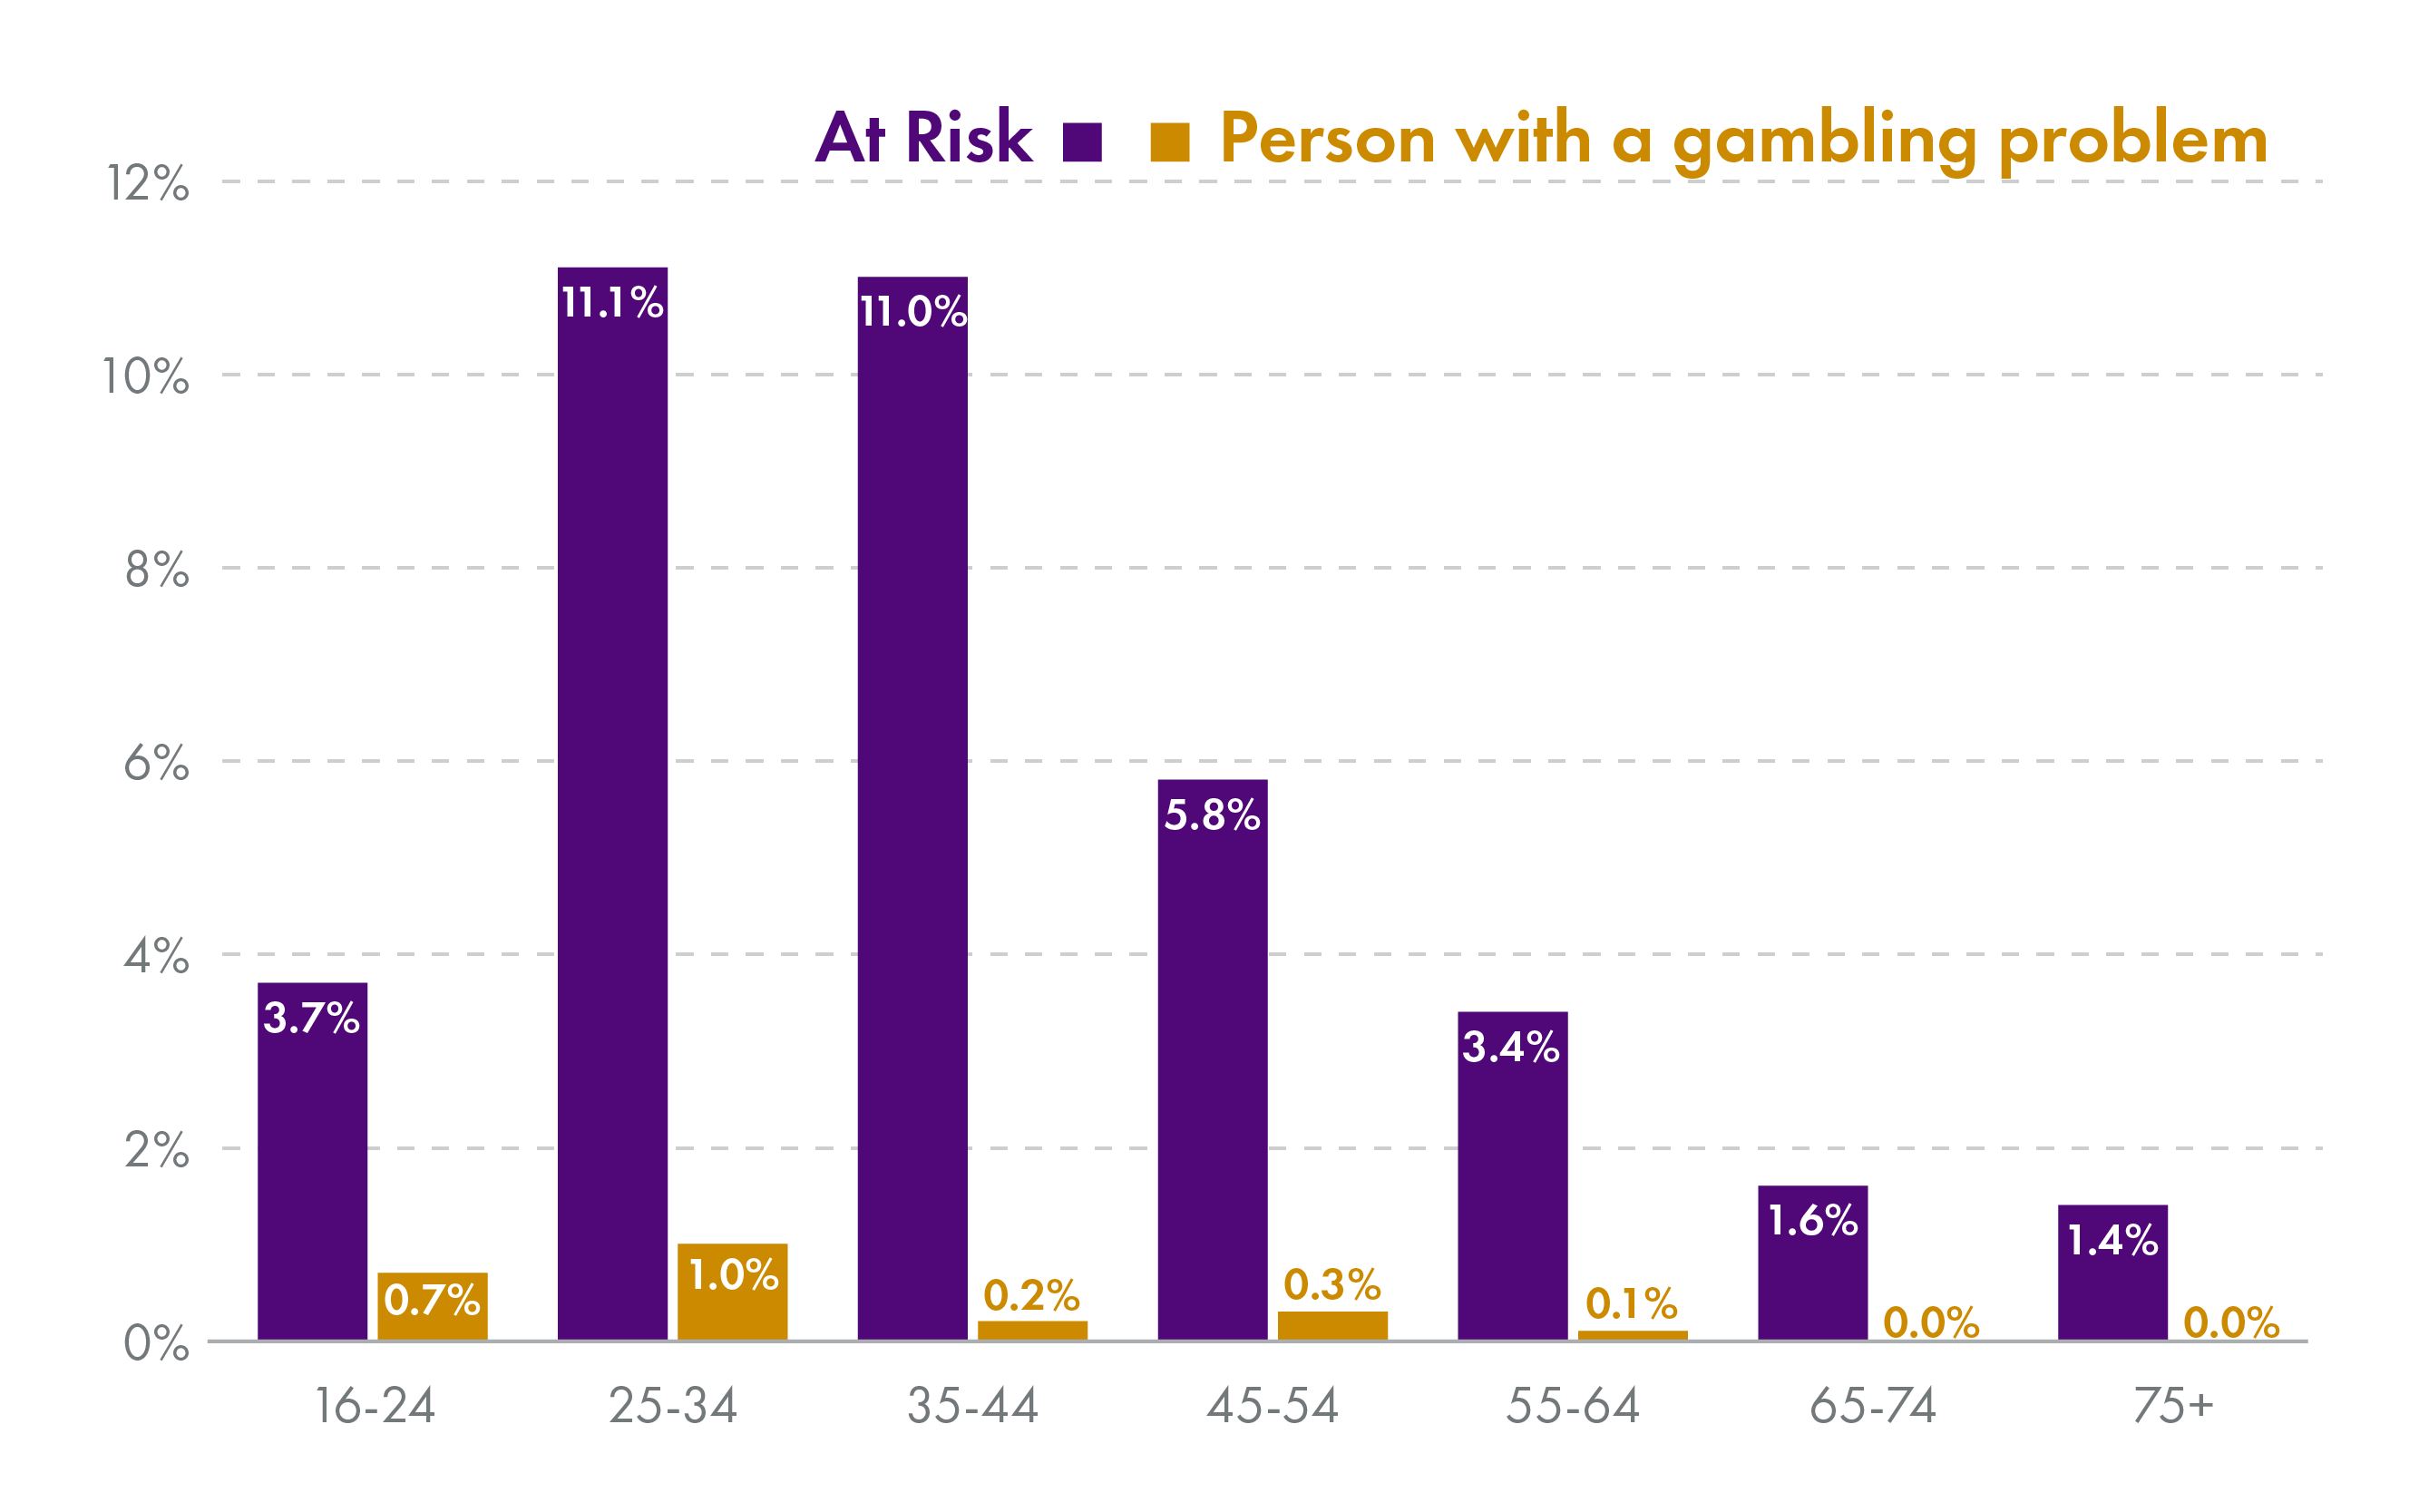 Bar chart showing the estimated proportion of people at risk of or with gambling problems. Risk was highest for those aged 25-34 and lowest for those aged over 75.